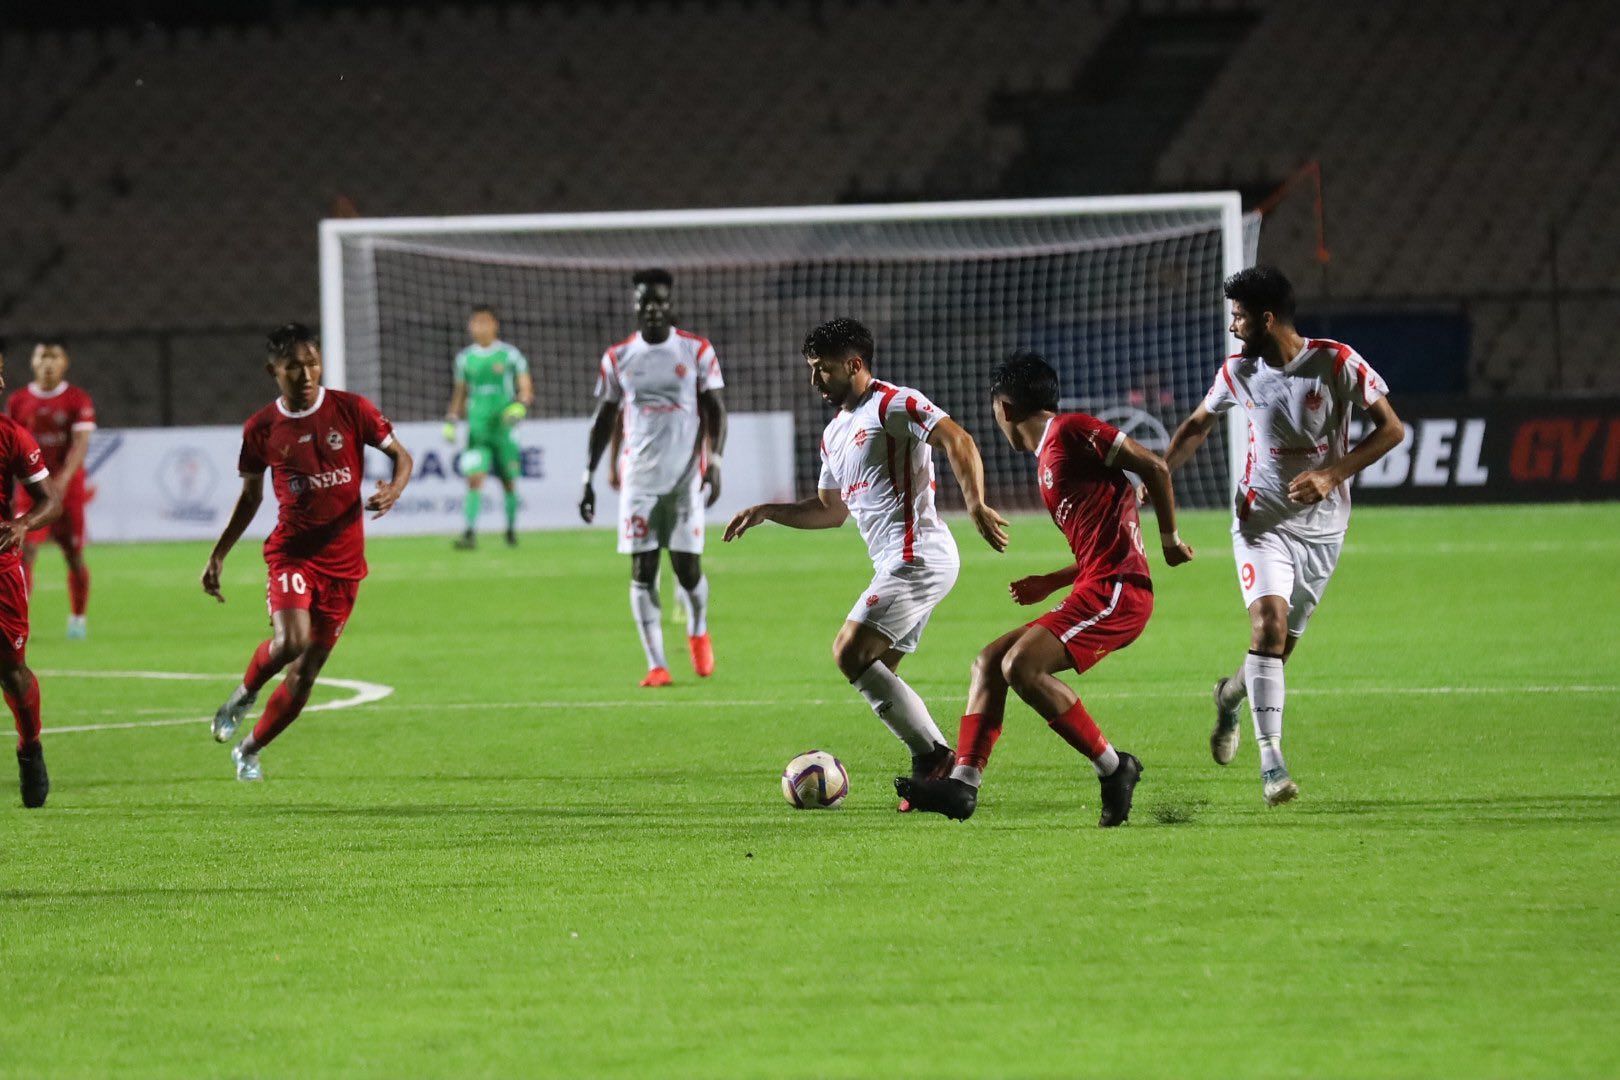 Aizawl FC and Namdhari players battling out in the middle (Image Credits: X/I-League)